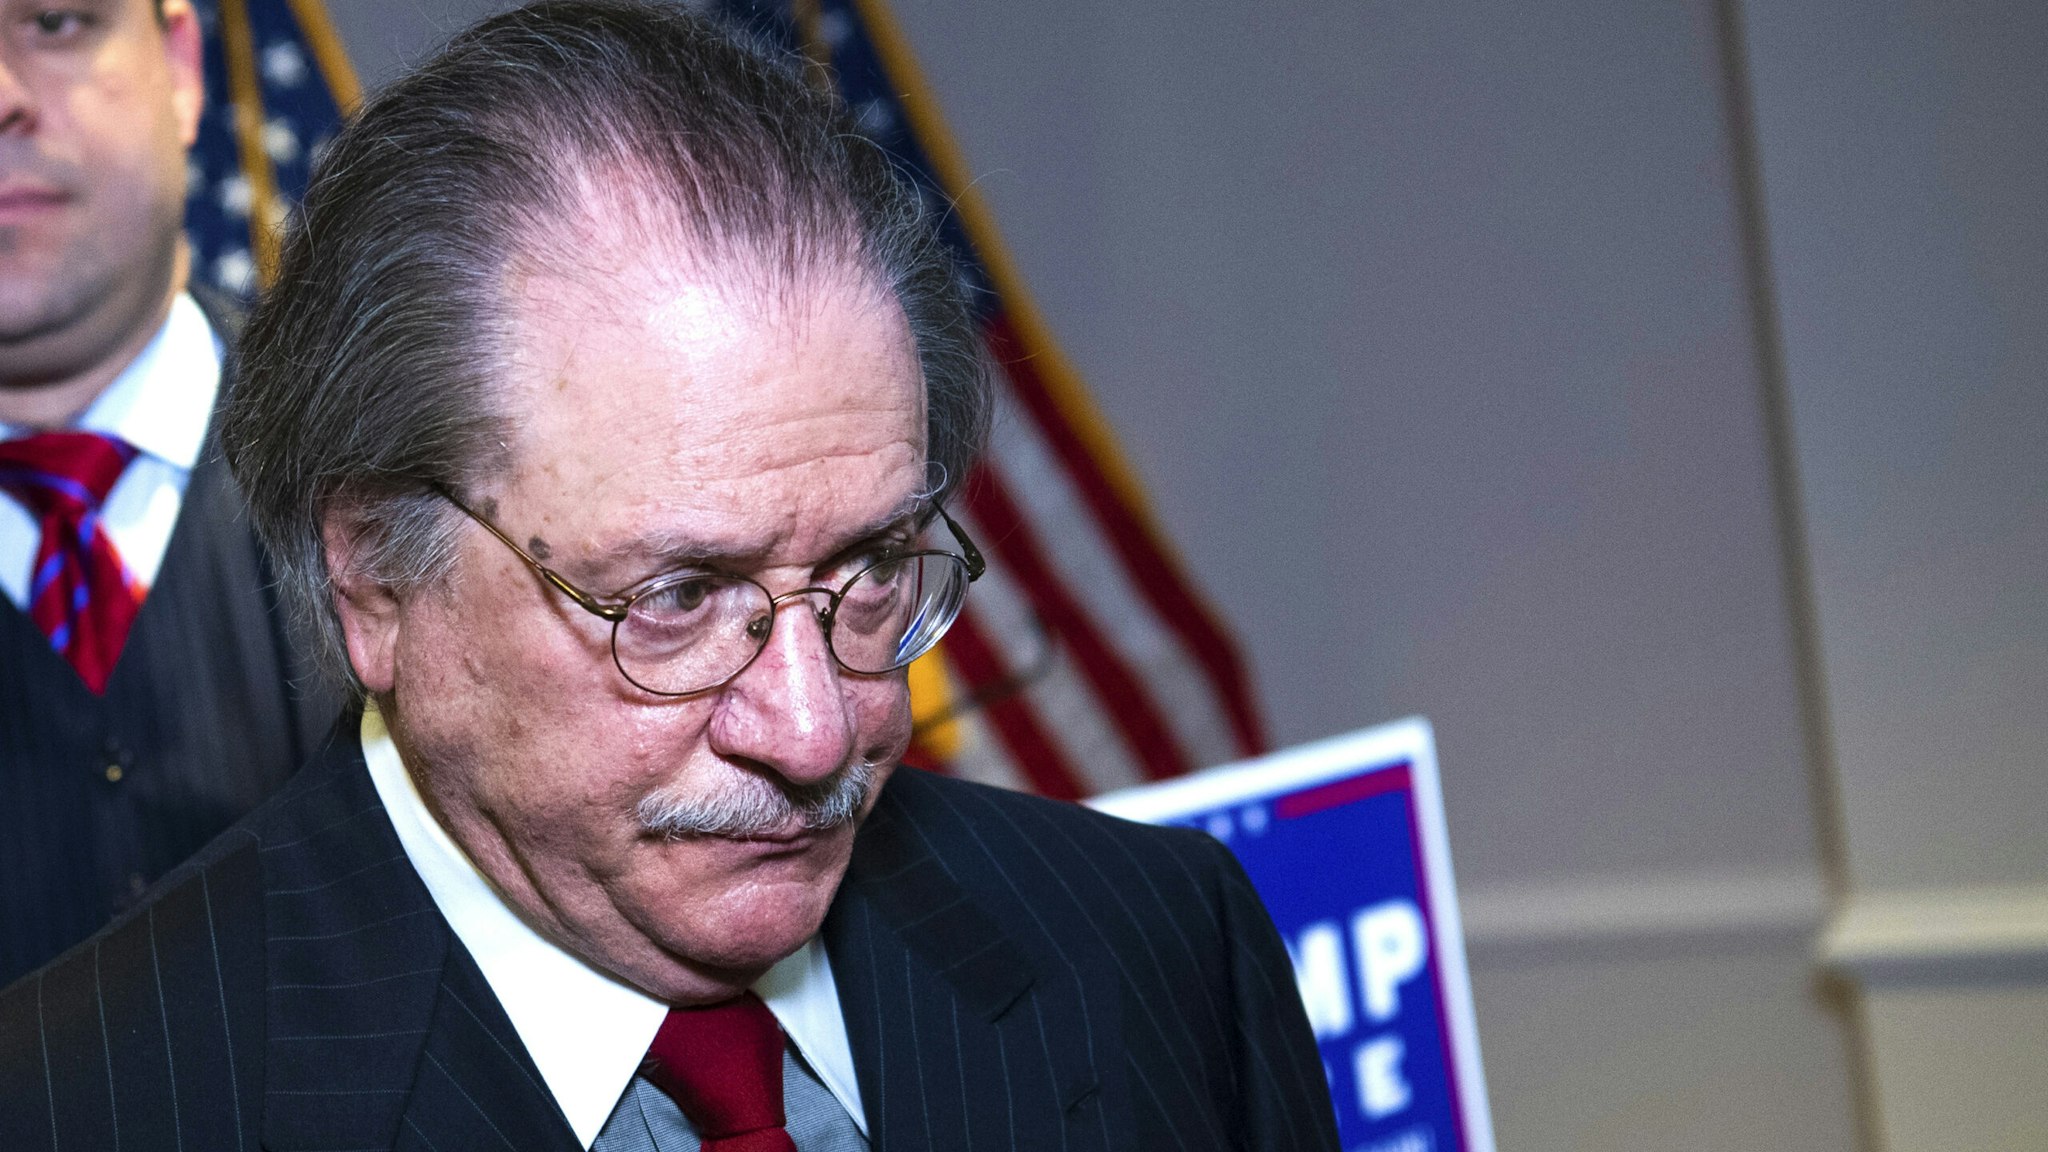 UNITED STATES - NOVEMBER 19: Joseph diGenova, attorney for President Donald Trump, concludes a news conference at the Republican National Committee on lawsuits regarding the outcome of the 2020 presidential election on Thursday, November 19, 2020. Trump attorneys Rudolph Giuliani, Sydney Powell, and Jenna Ellis, also attended.